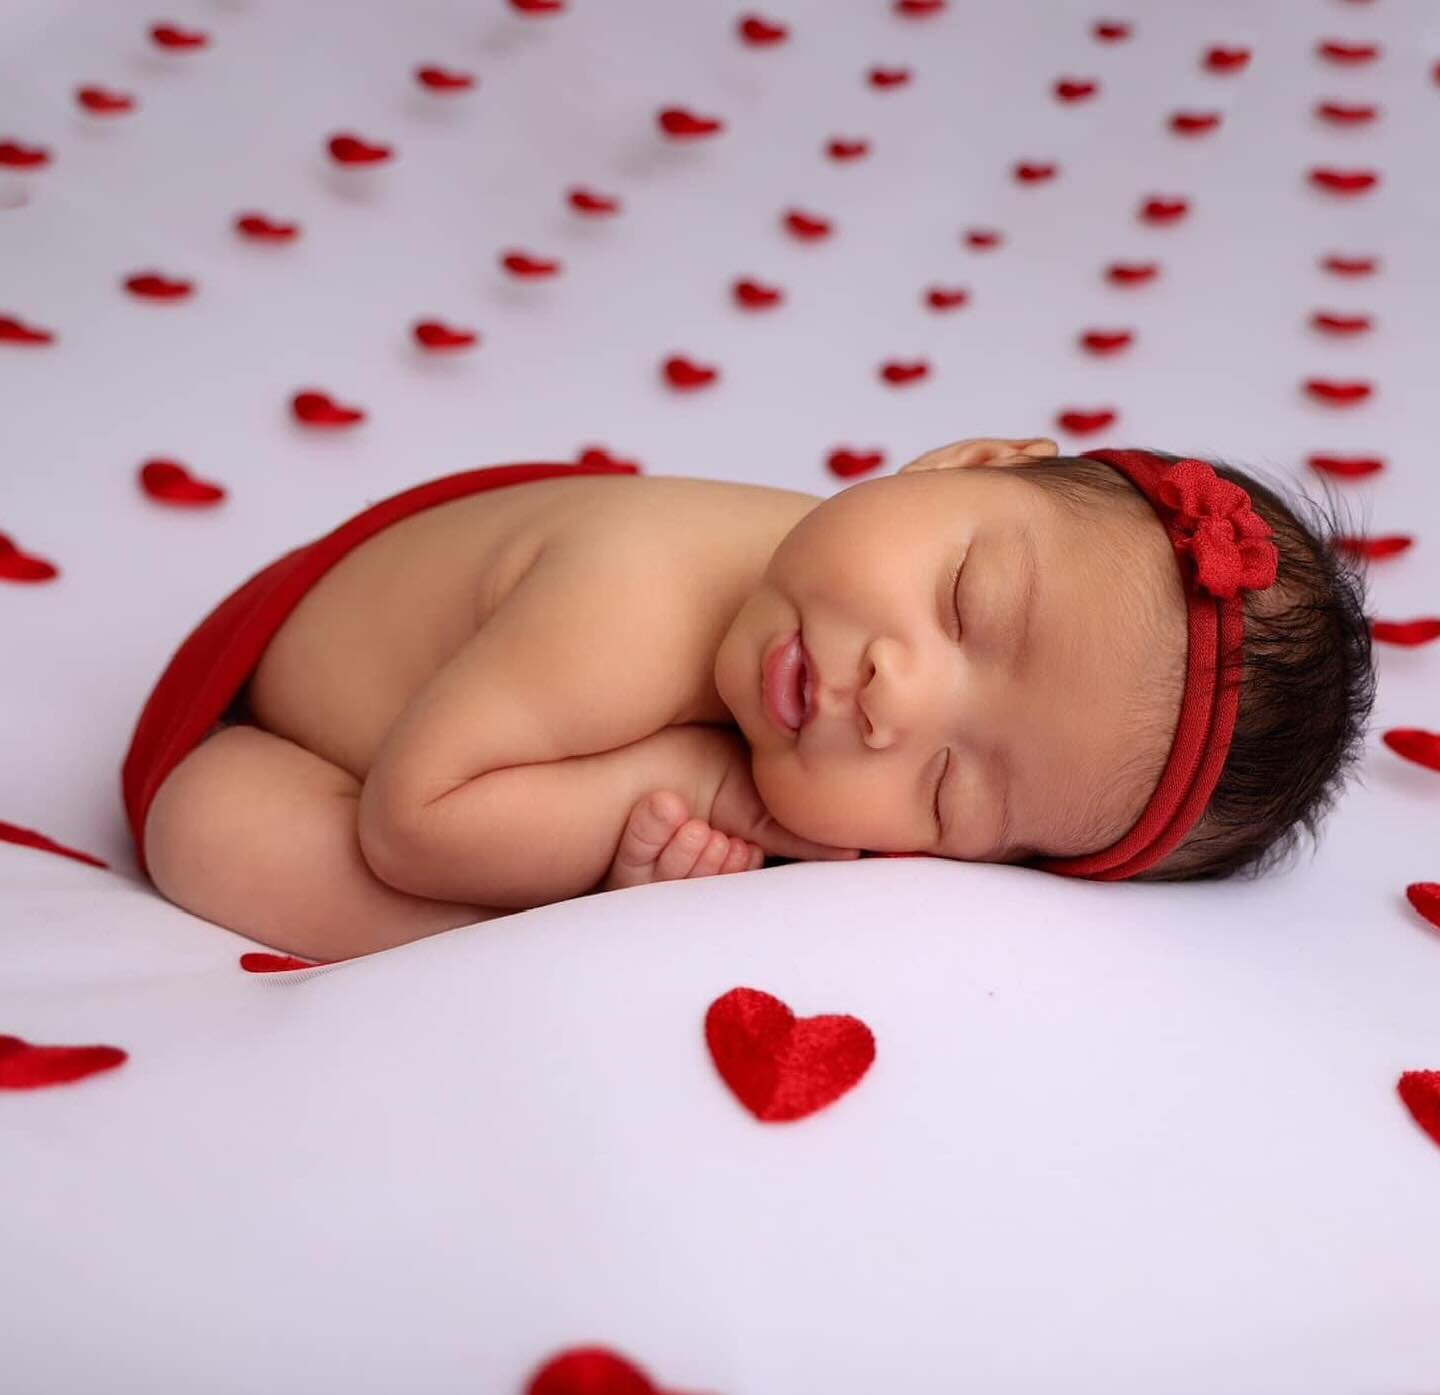 From our associate Veronica we feel the ❤️❤️❤️❤️.

. We train all of our associates to use the best lighting and angles so that they can provide in home or other studio shoots under the @anabrandt brand - Do you need a newborn photographer you can tr